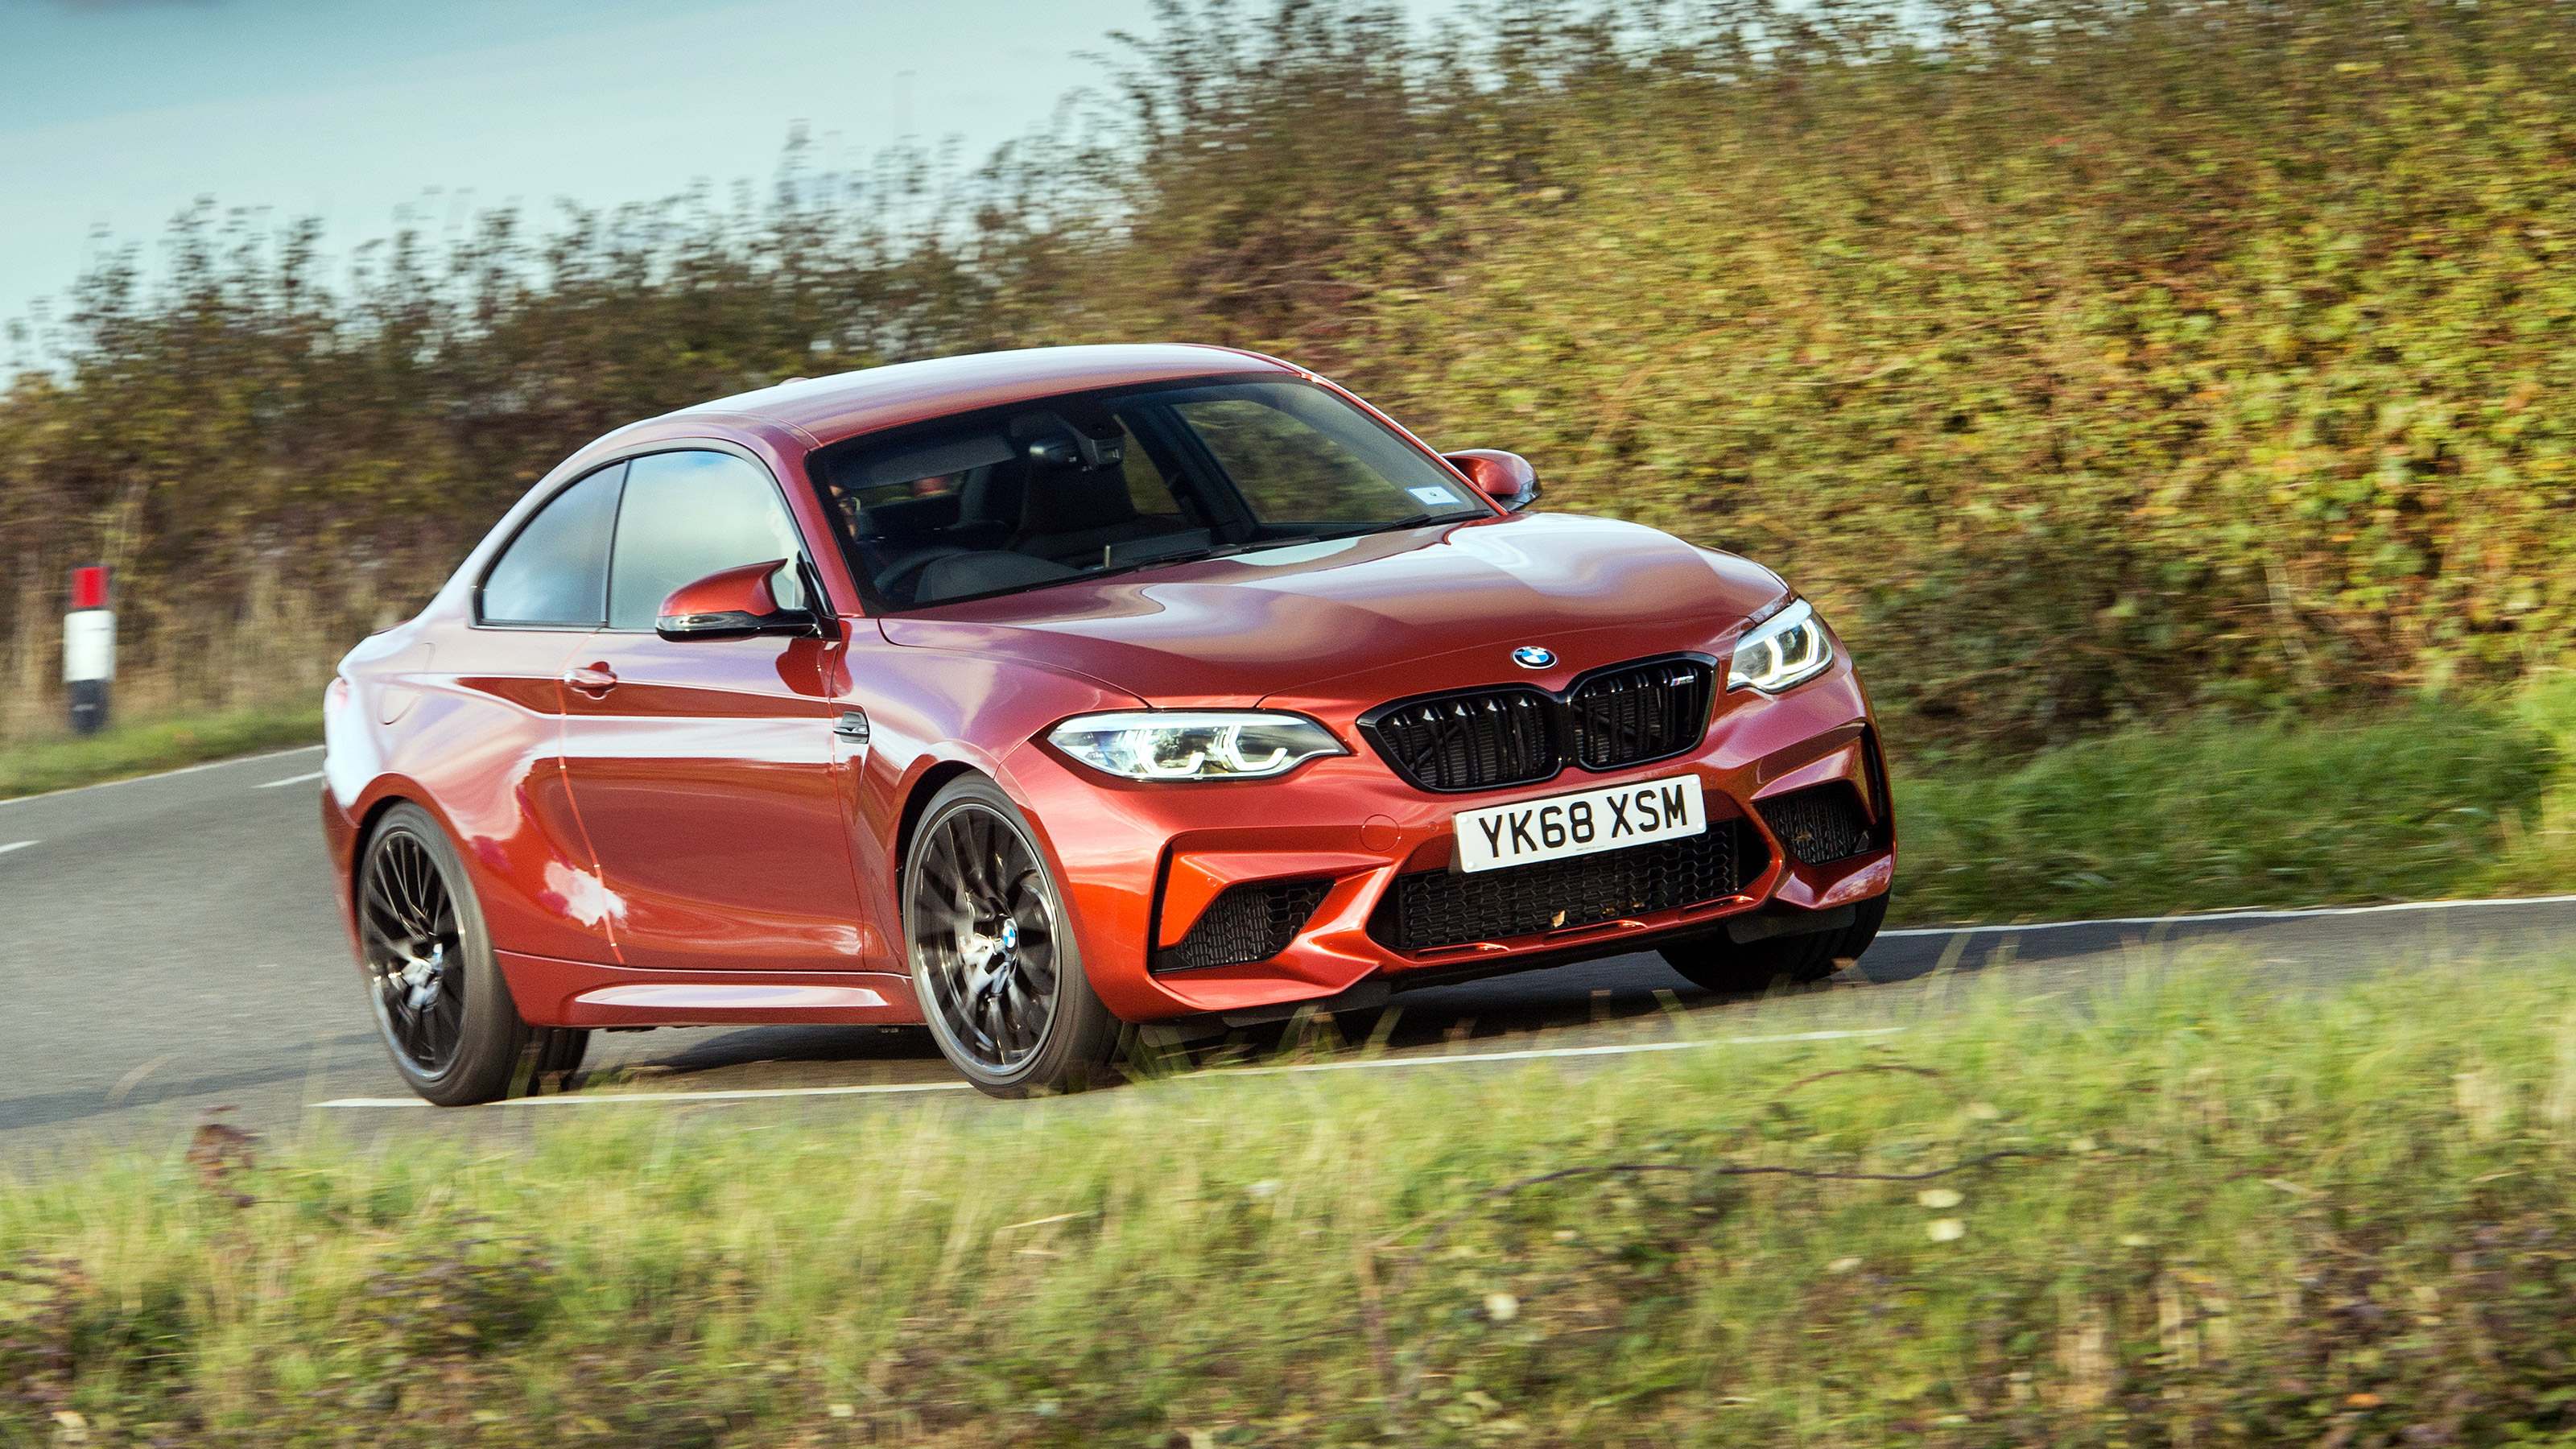 BMW M2 Competition (F87, Manual) - RSR Bookings - The Experience